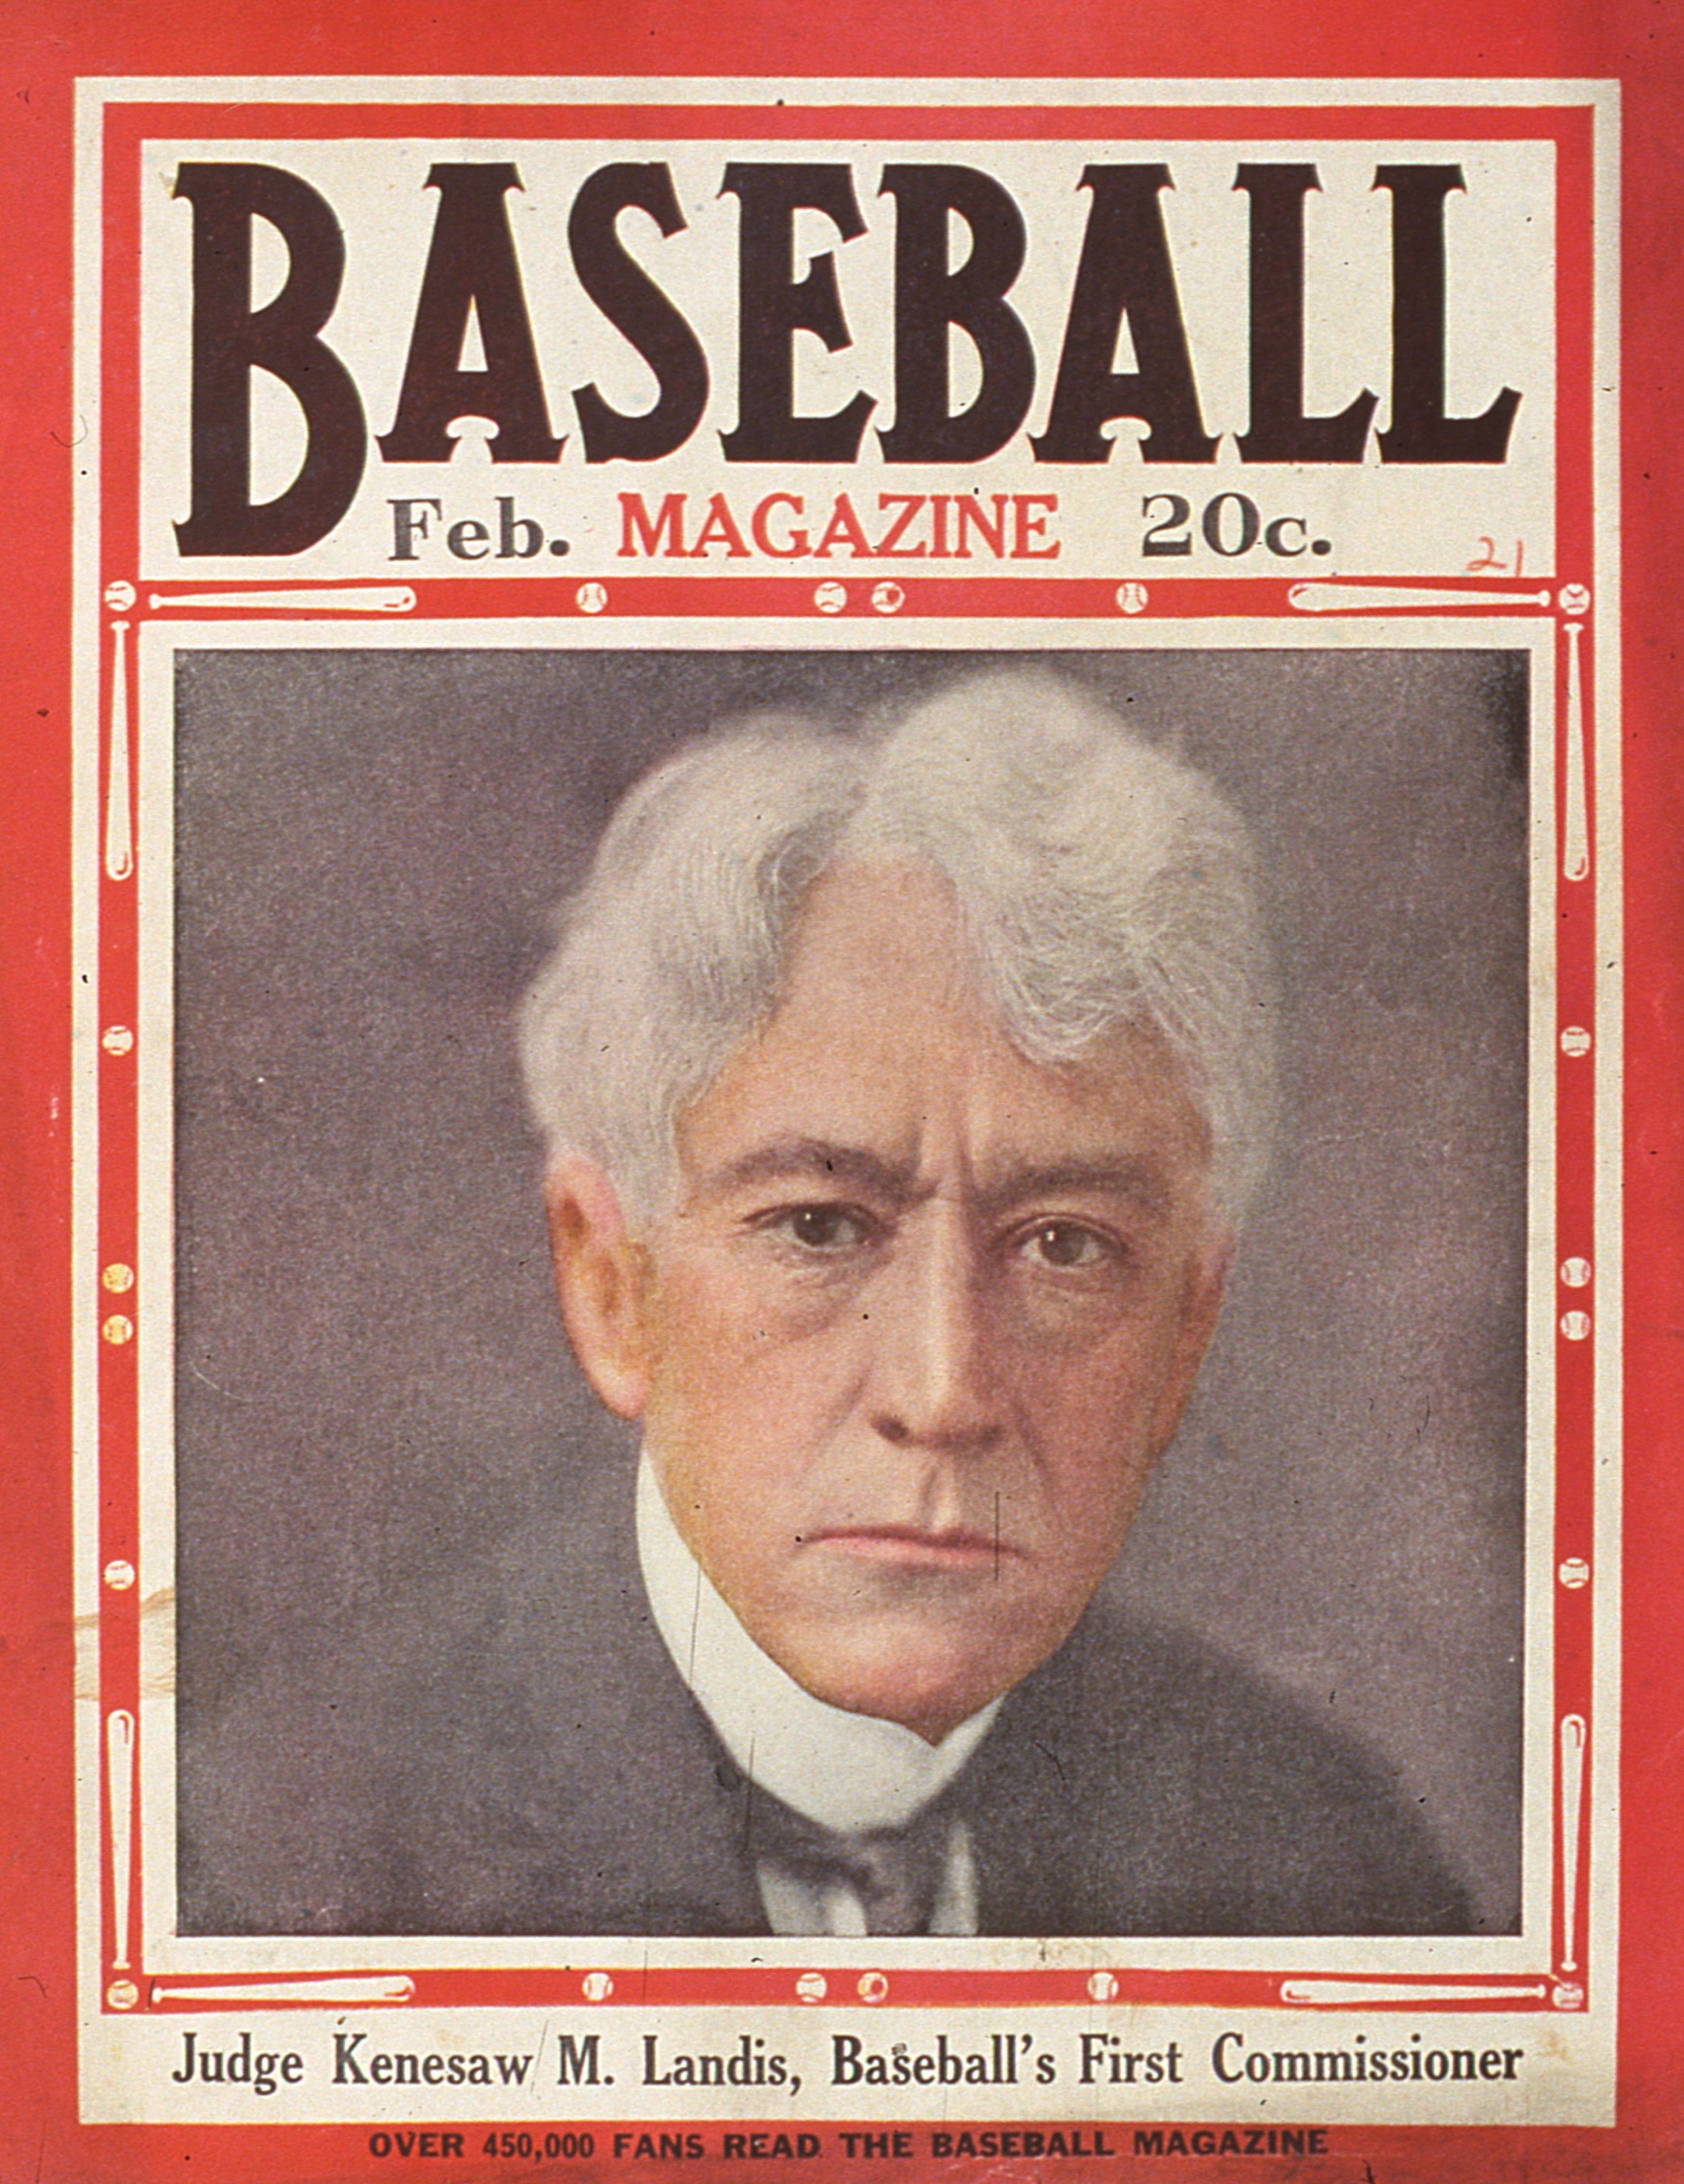 Baseball's first Commissioner Kennesaw Mountain Landis is pictured on the February 1921 cover of Baseball Magazine (SABR-RUCKER ARCHIVE)